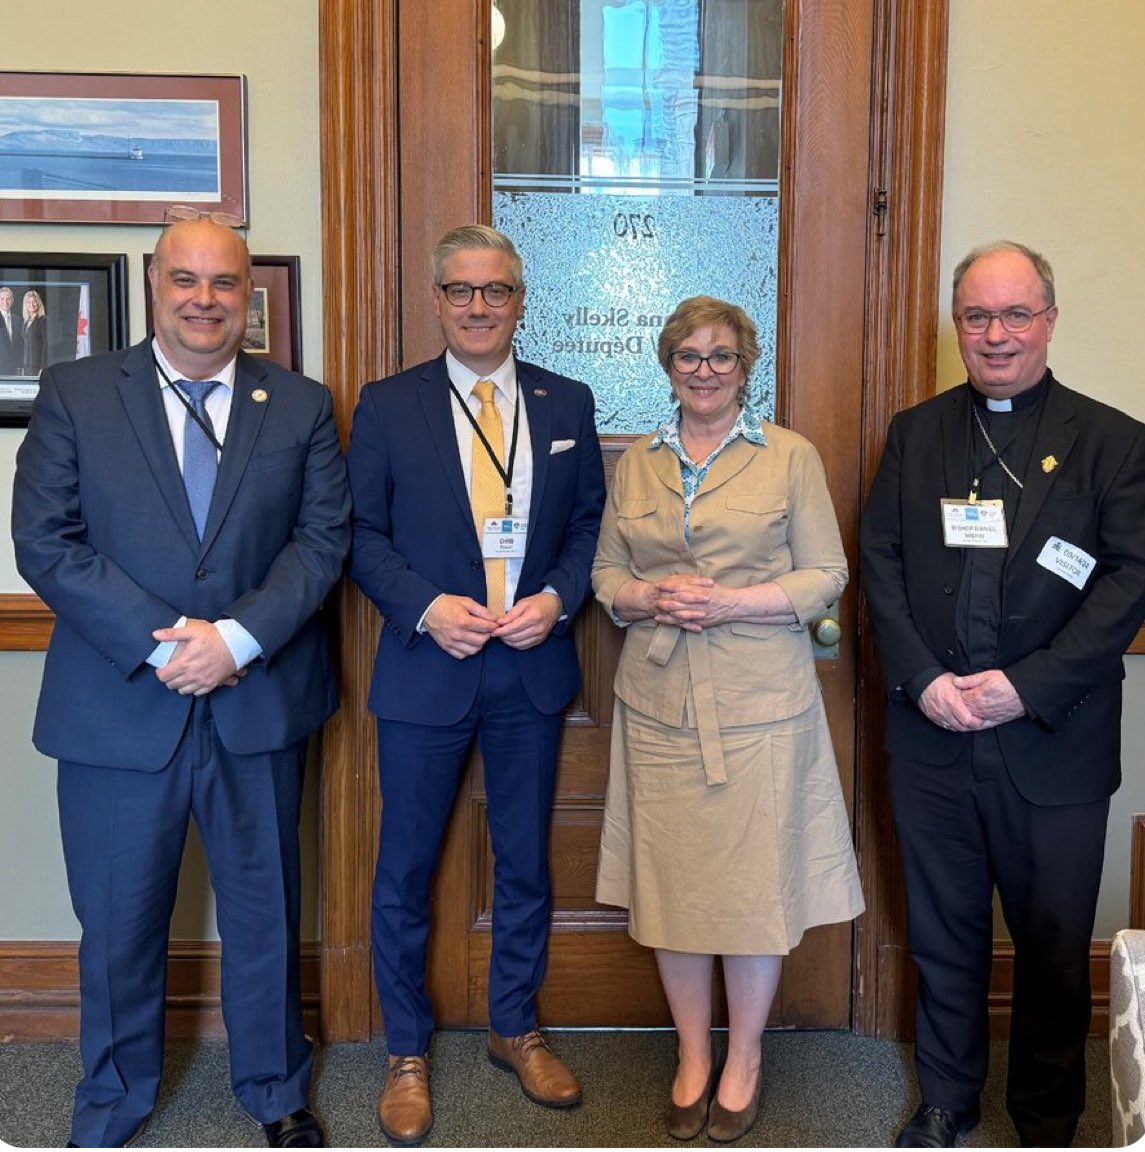 Discussing Ontario’s Catholic Schools - highlights and priorities at Queen’s Park today - OCSTA Director and Chair of @BHNCDSB @Rick_Petrella @oectagovernor and Bishop Daniel Miehm with @RobinMartinPC #onted #CatholicEd